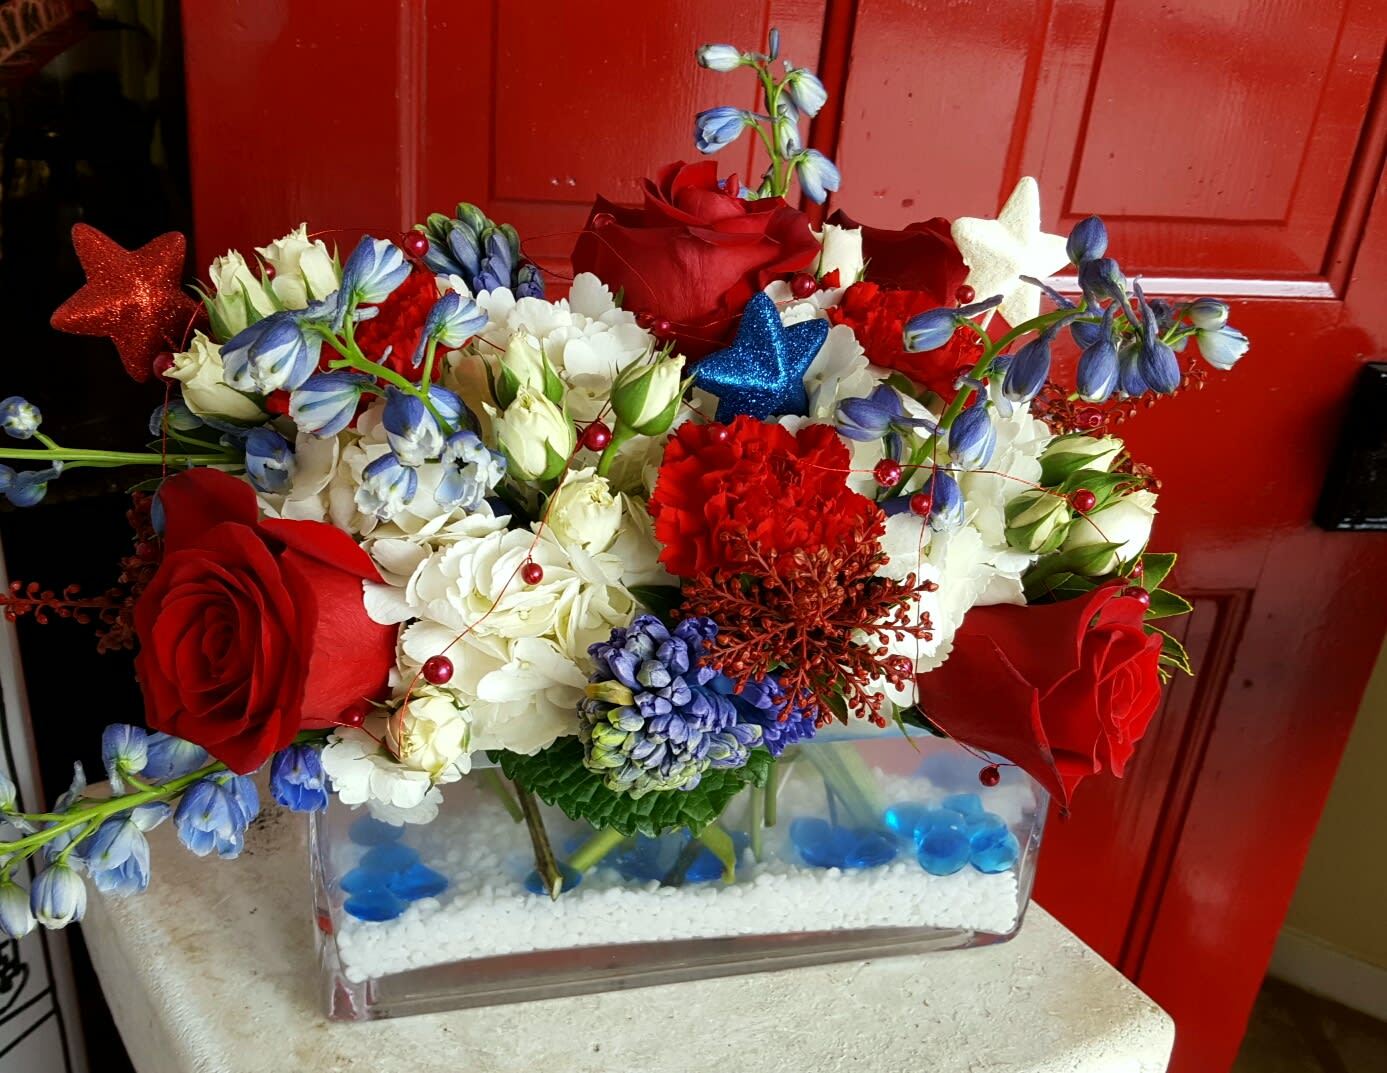 ALL AMERICAN LOVER - THIS BEAUTIFUL DISPLAY OF RED, WHITE AND BLUE FLOWERS IS A TRIBUTE TO, THE LOVE FOR OUR COUNTRY.